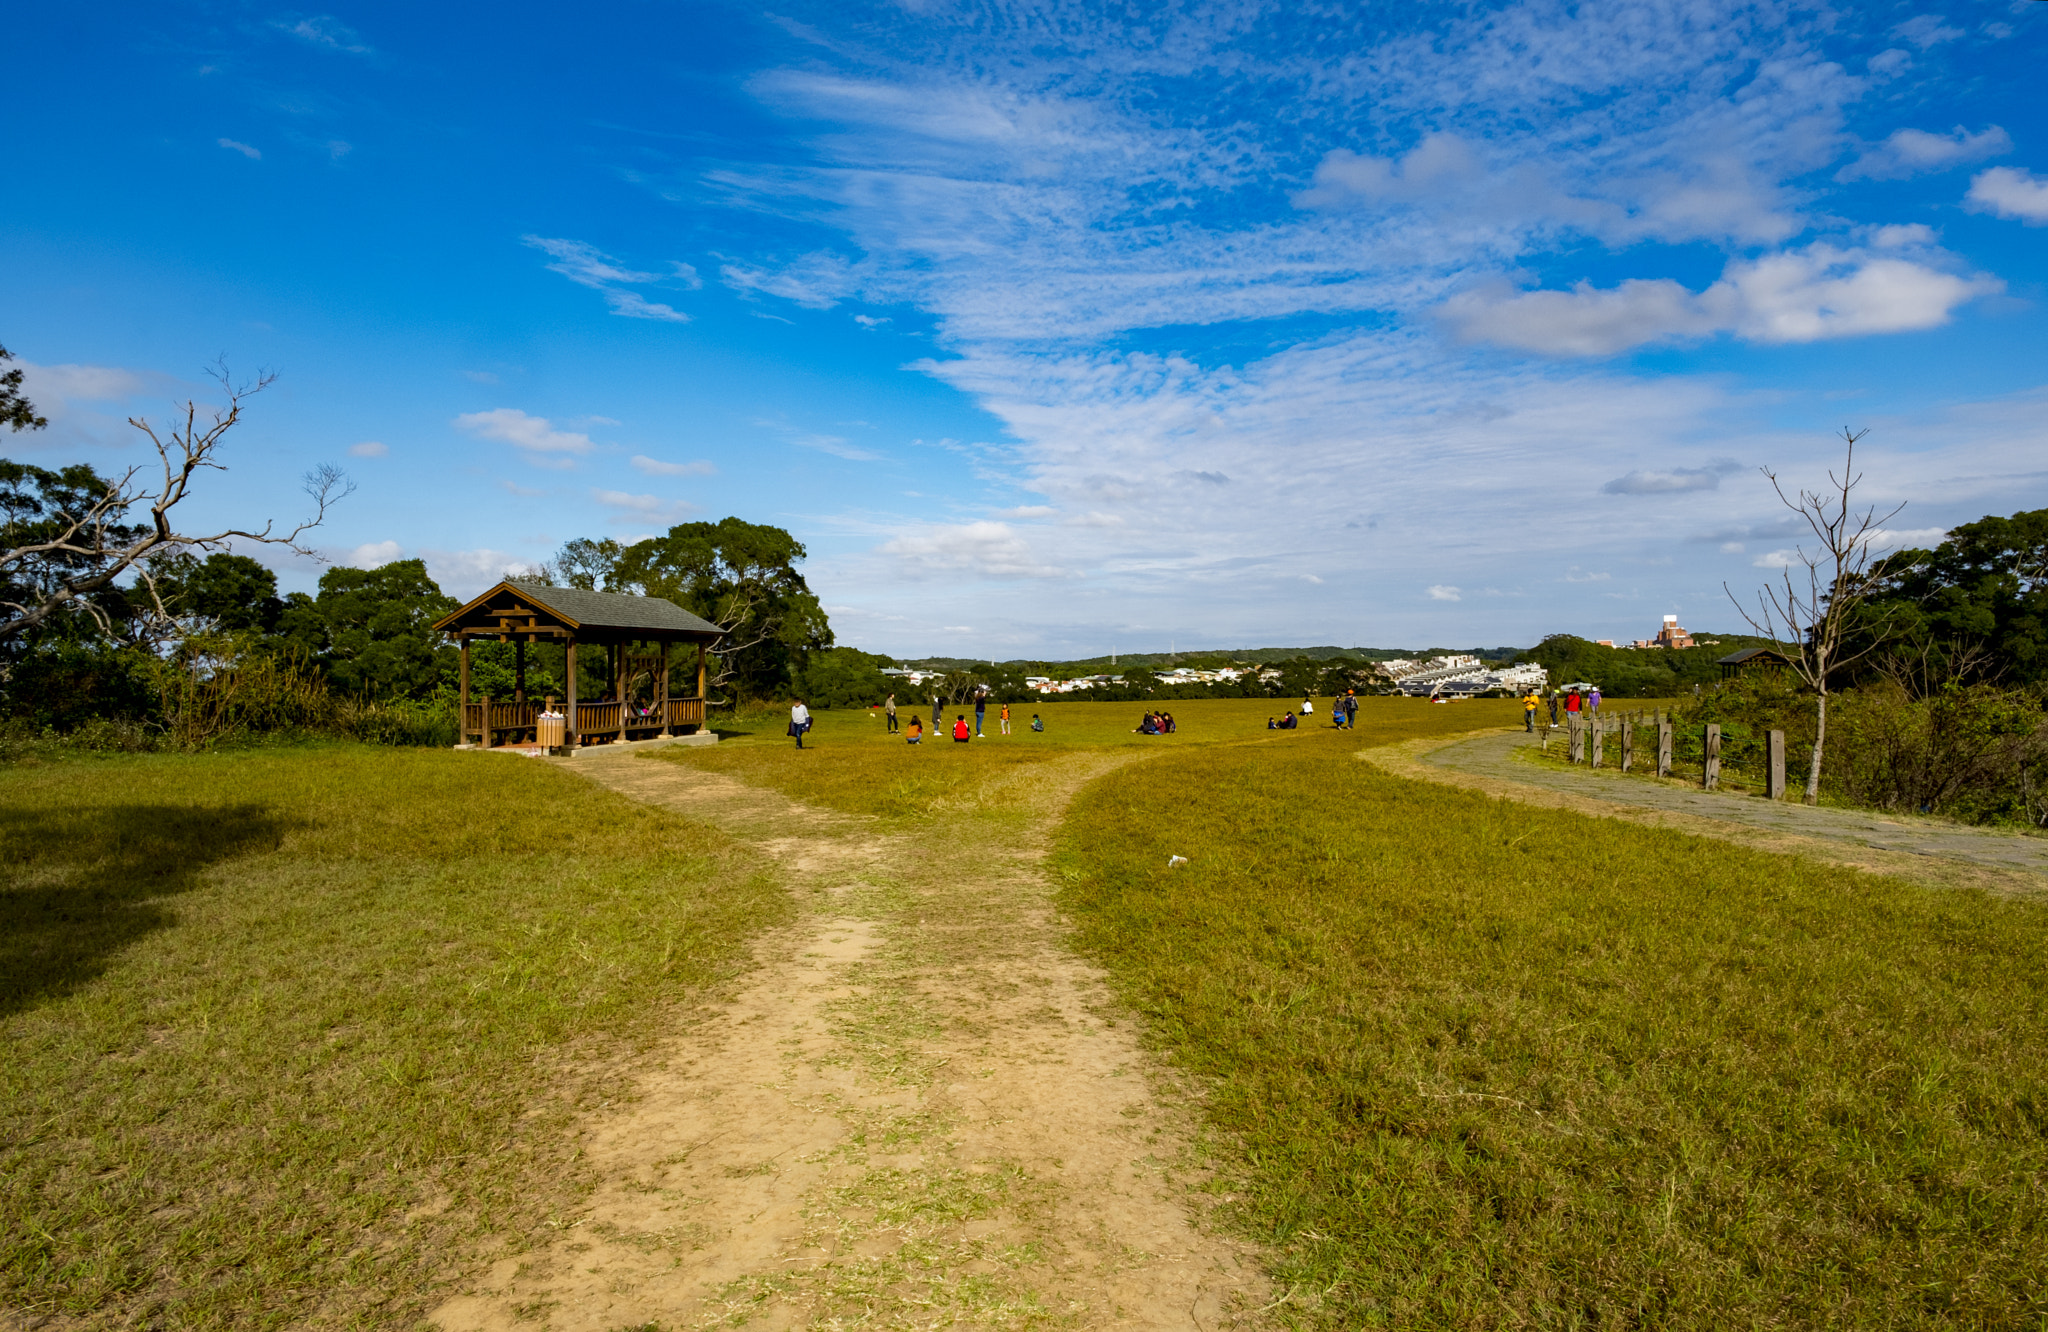 ZEISS Touit 12mm F2.8 sample photo. Y road of  grasslands photography